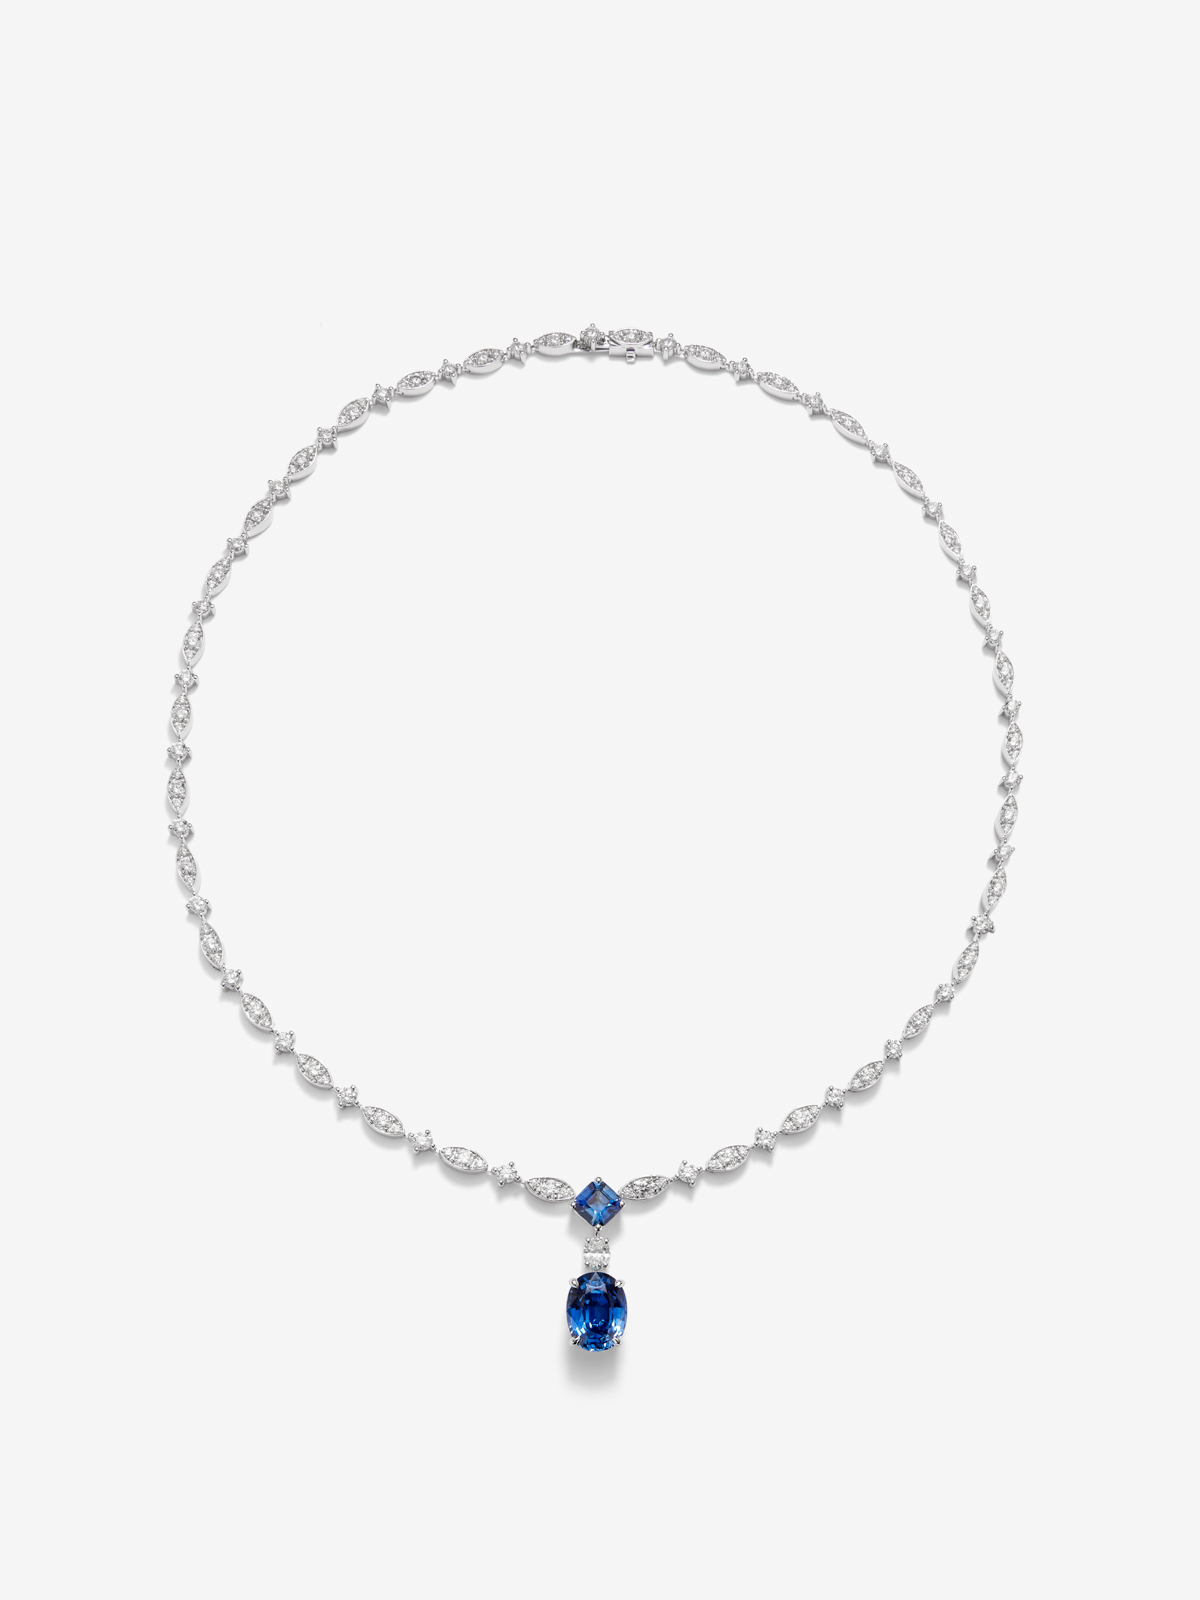 18K white gold necklace with royal blue sapphire in 5.05 cts oval size, blue skews in octagonal size 1.04 cts and white diamonds in bright size of 7.59 cts